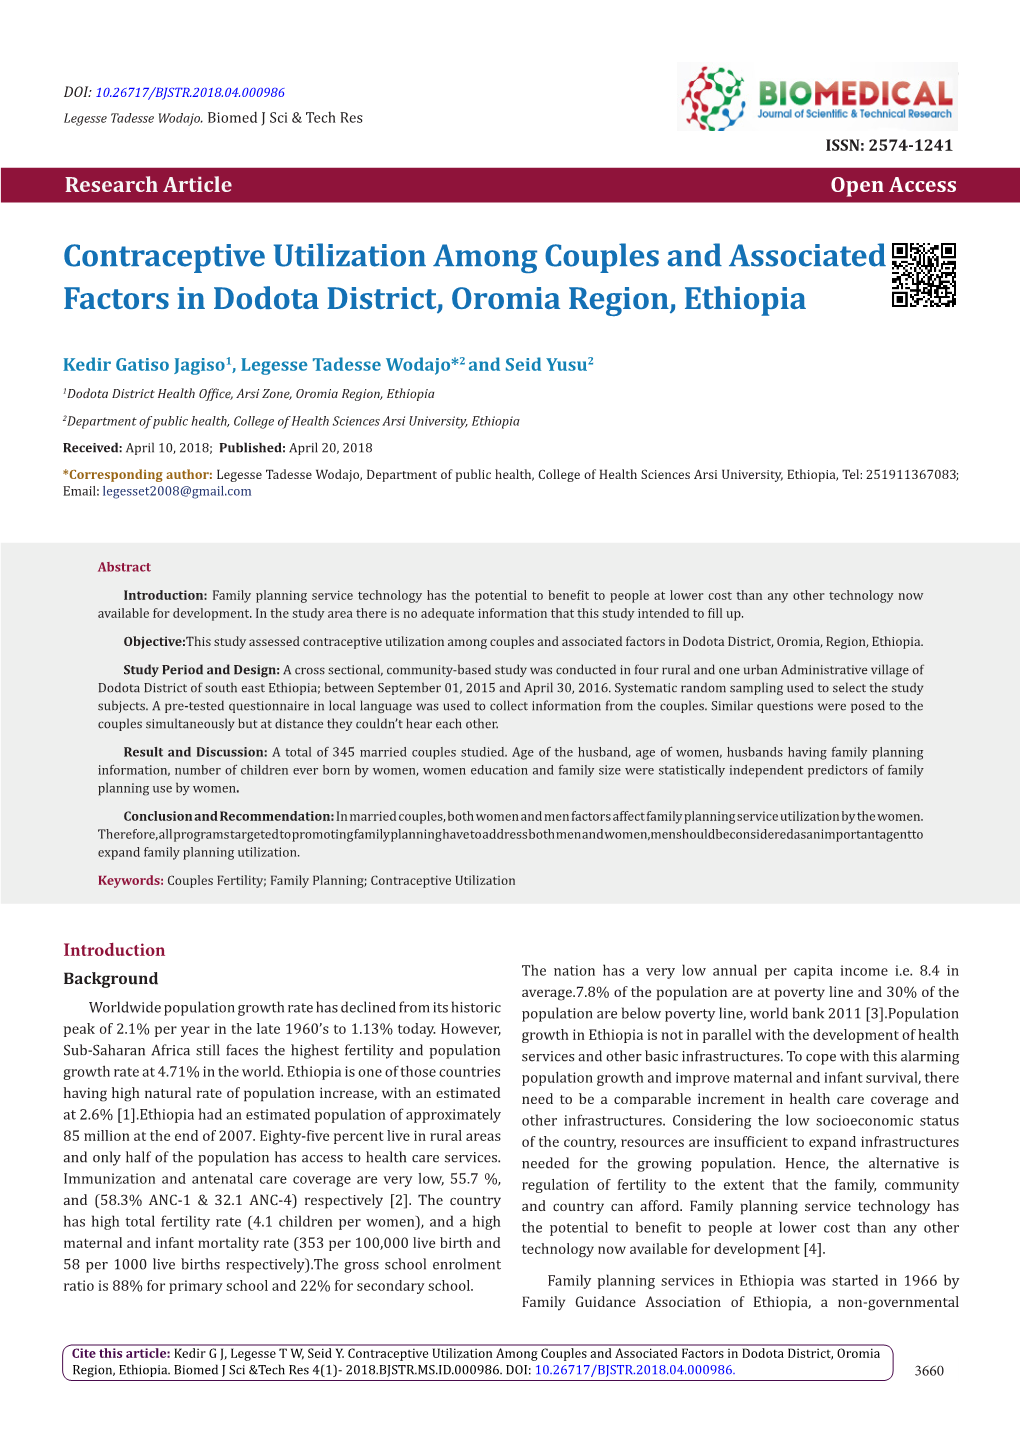 Contraceptive Utilization Among Couples and Associated Factors in Dodota District, Oromia Region, Ethiopia